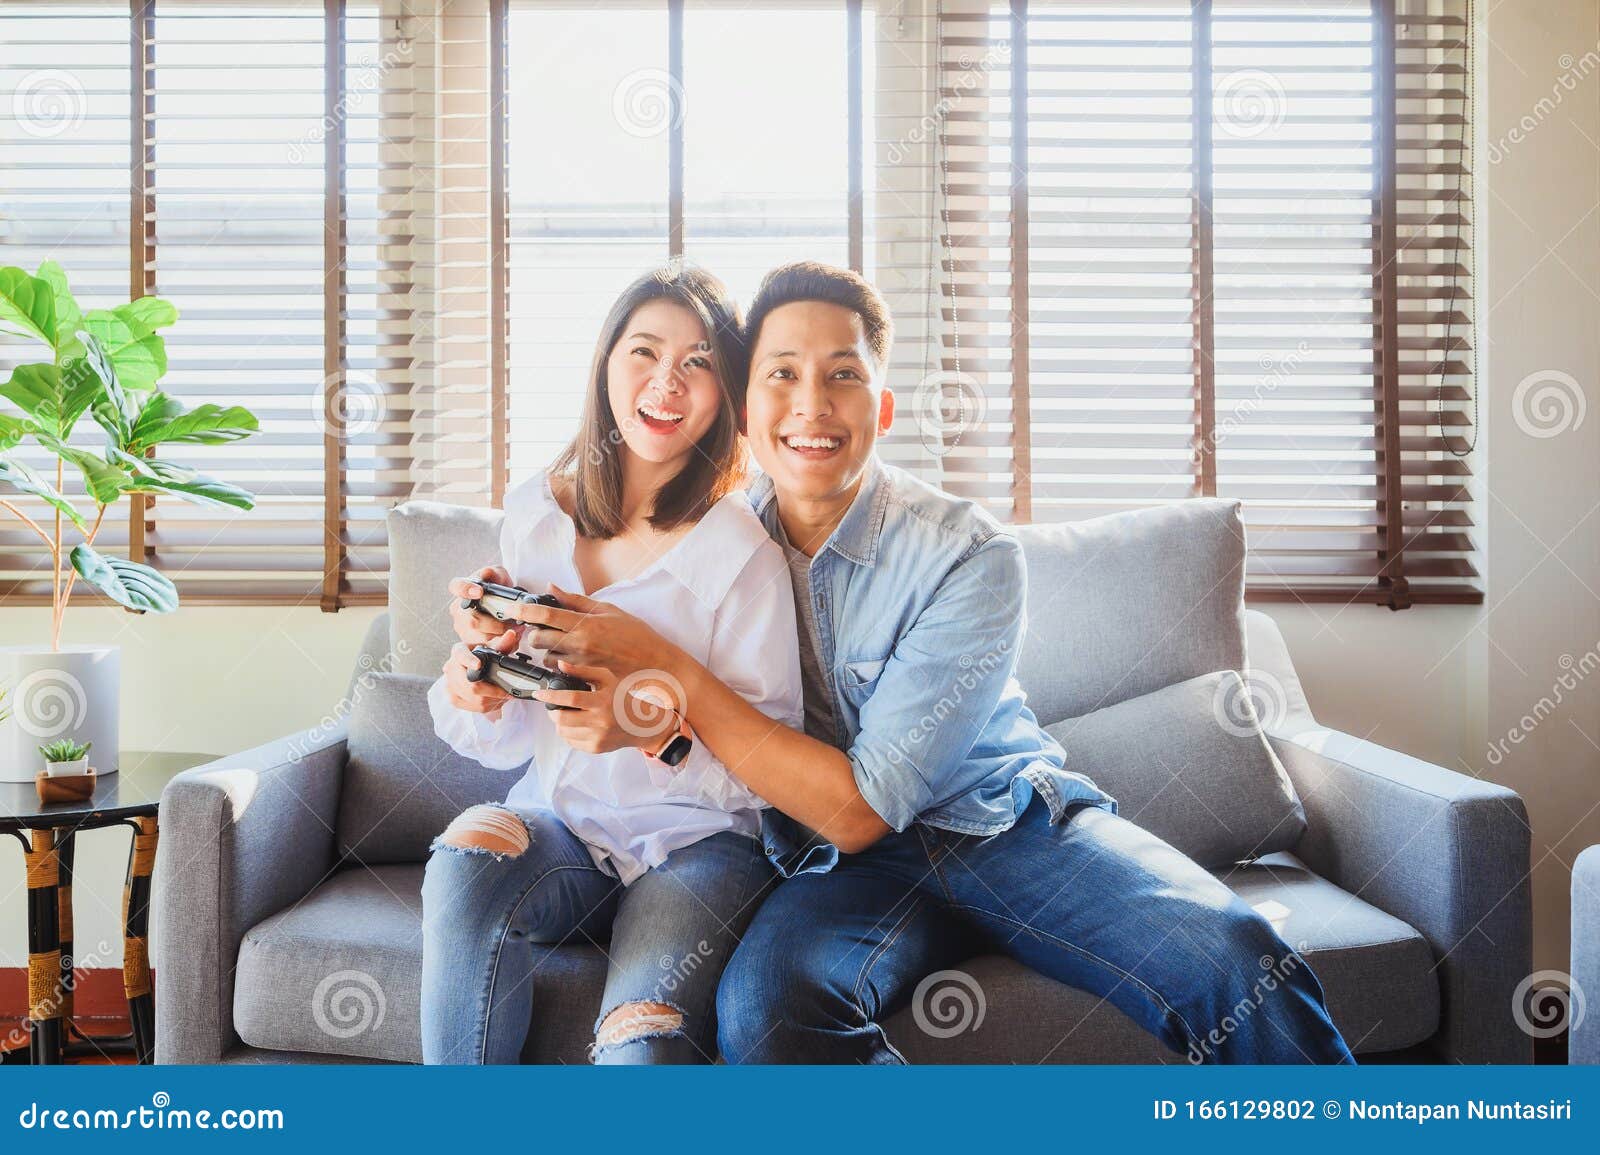 Pornography calcium A central tool that plays an important role Couple Playing Video Game Together Stock Photo - Image of controller,  excited: 166129802